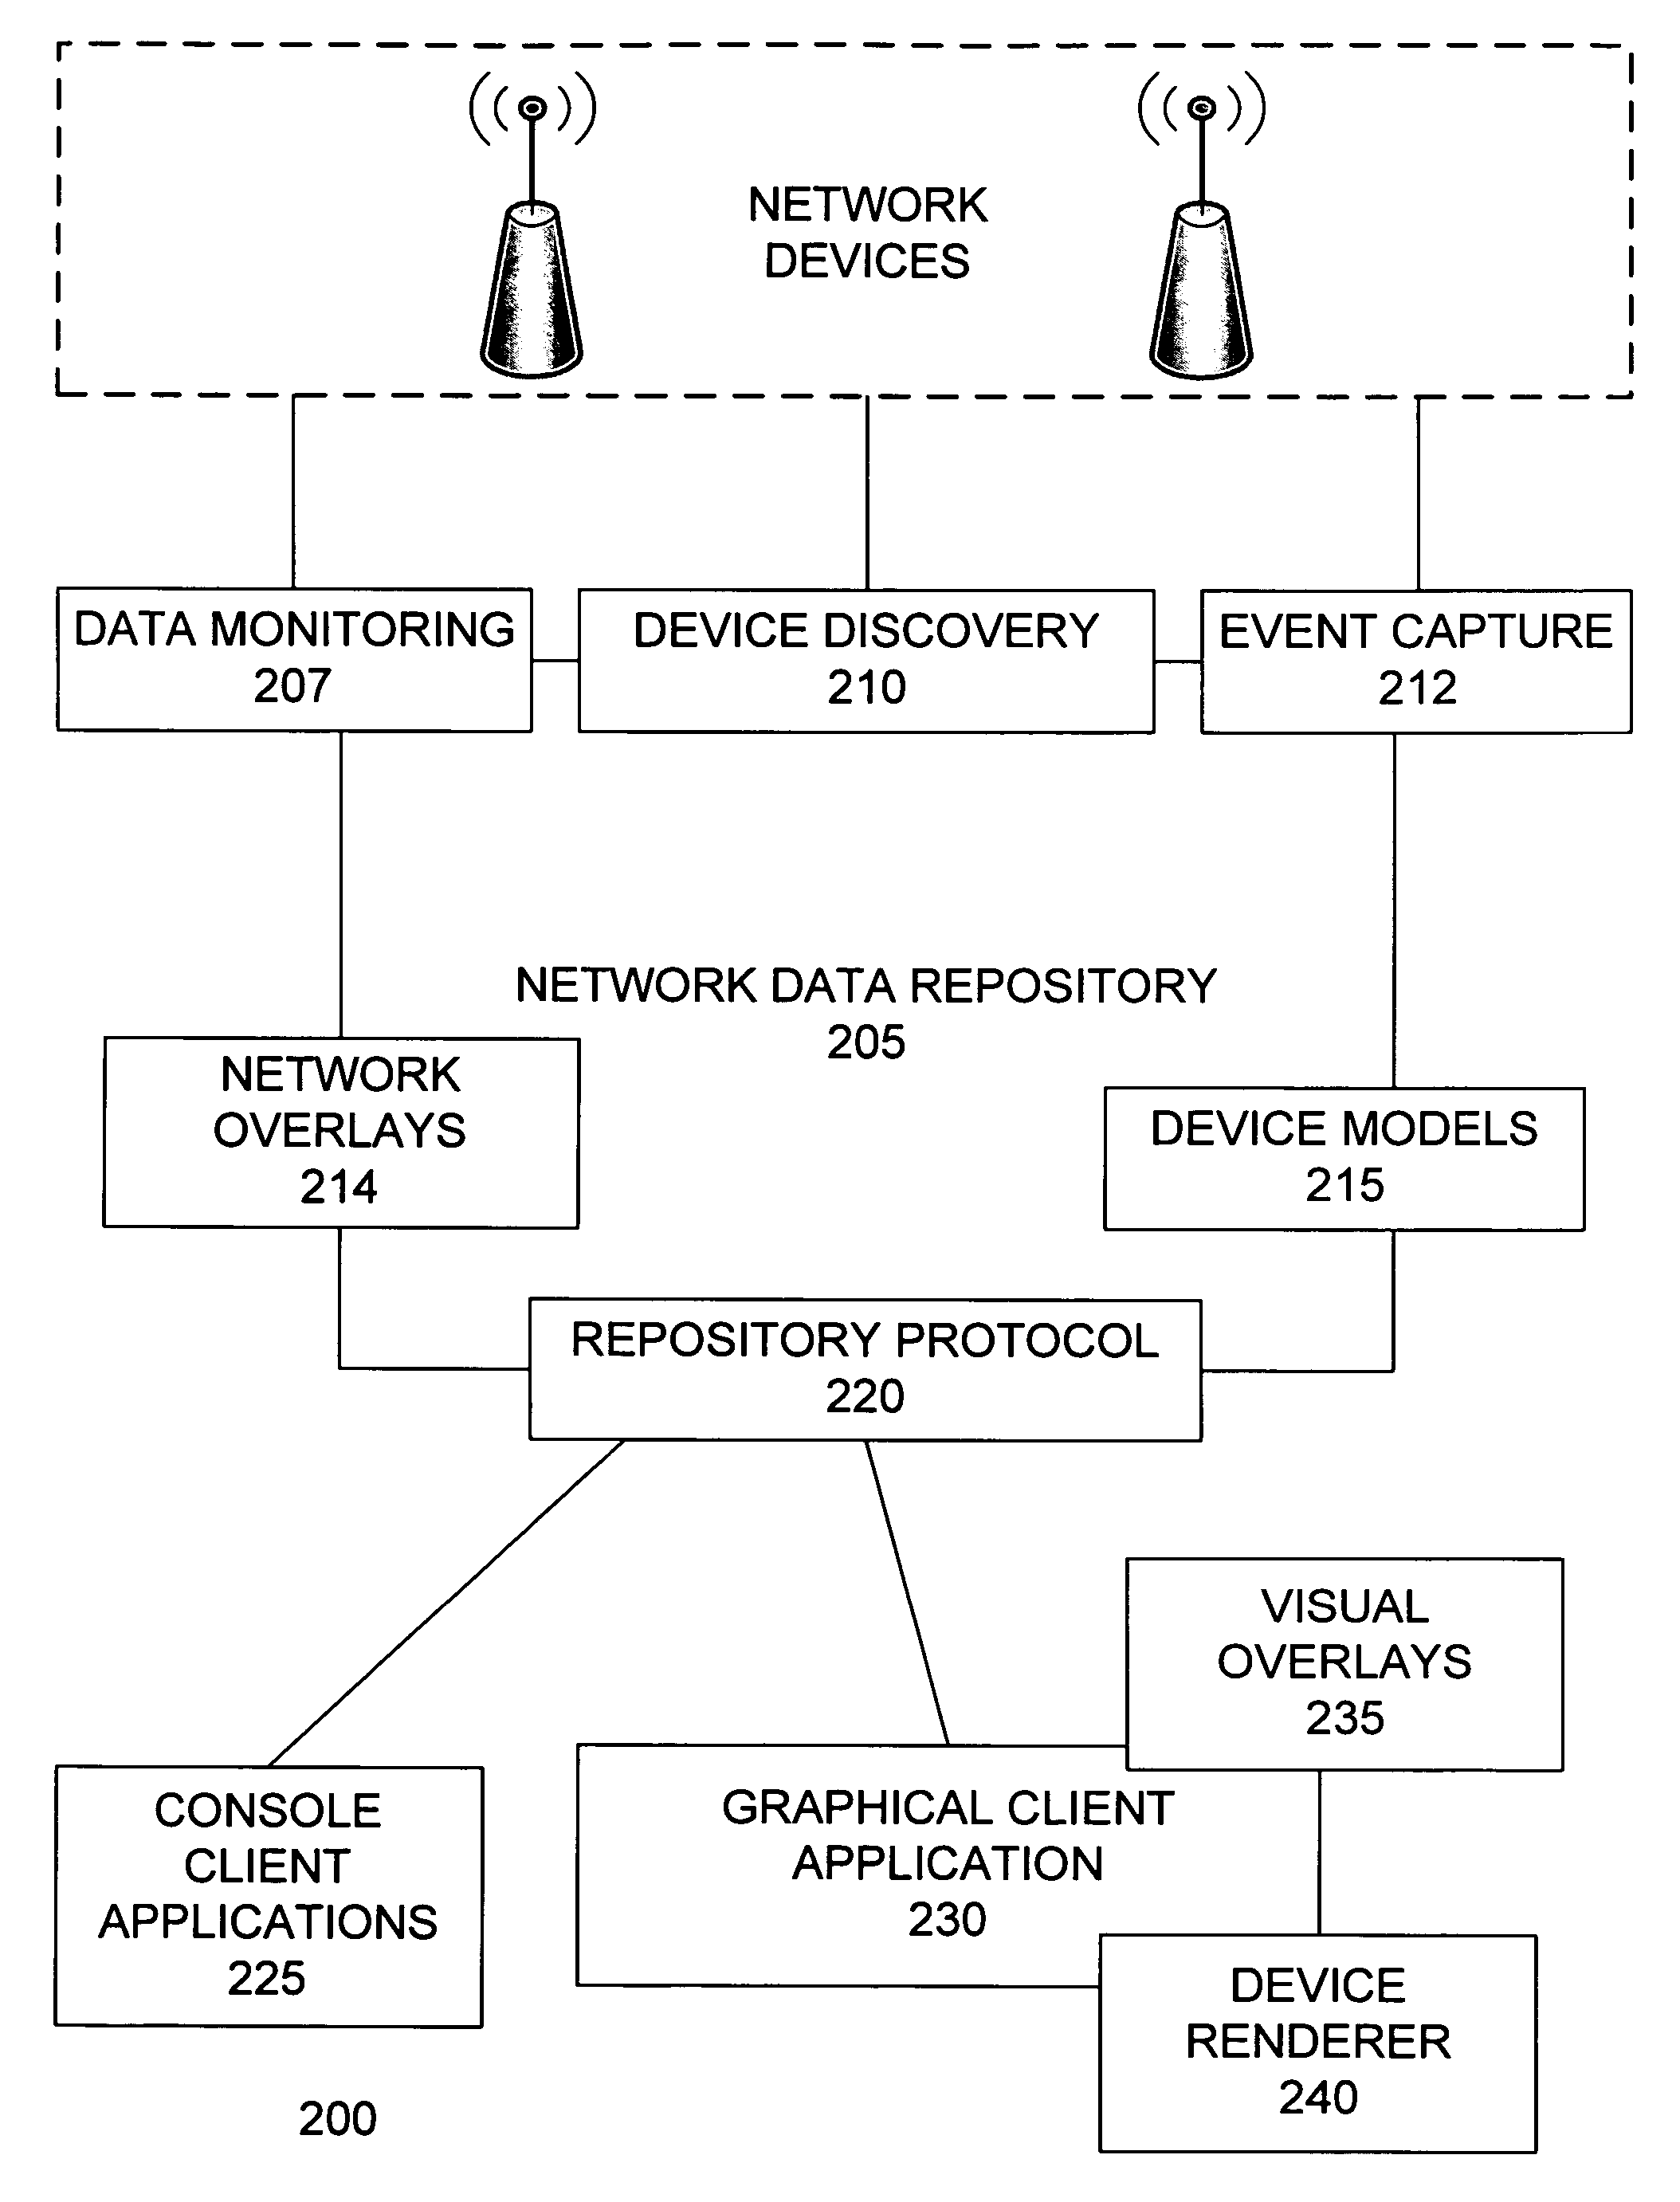 Network monitoring device